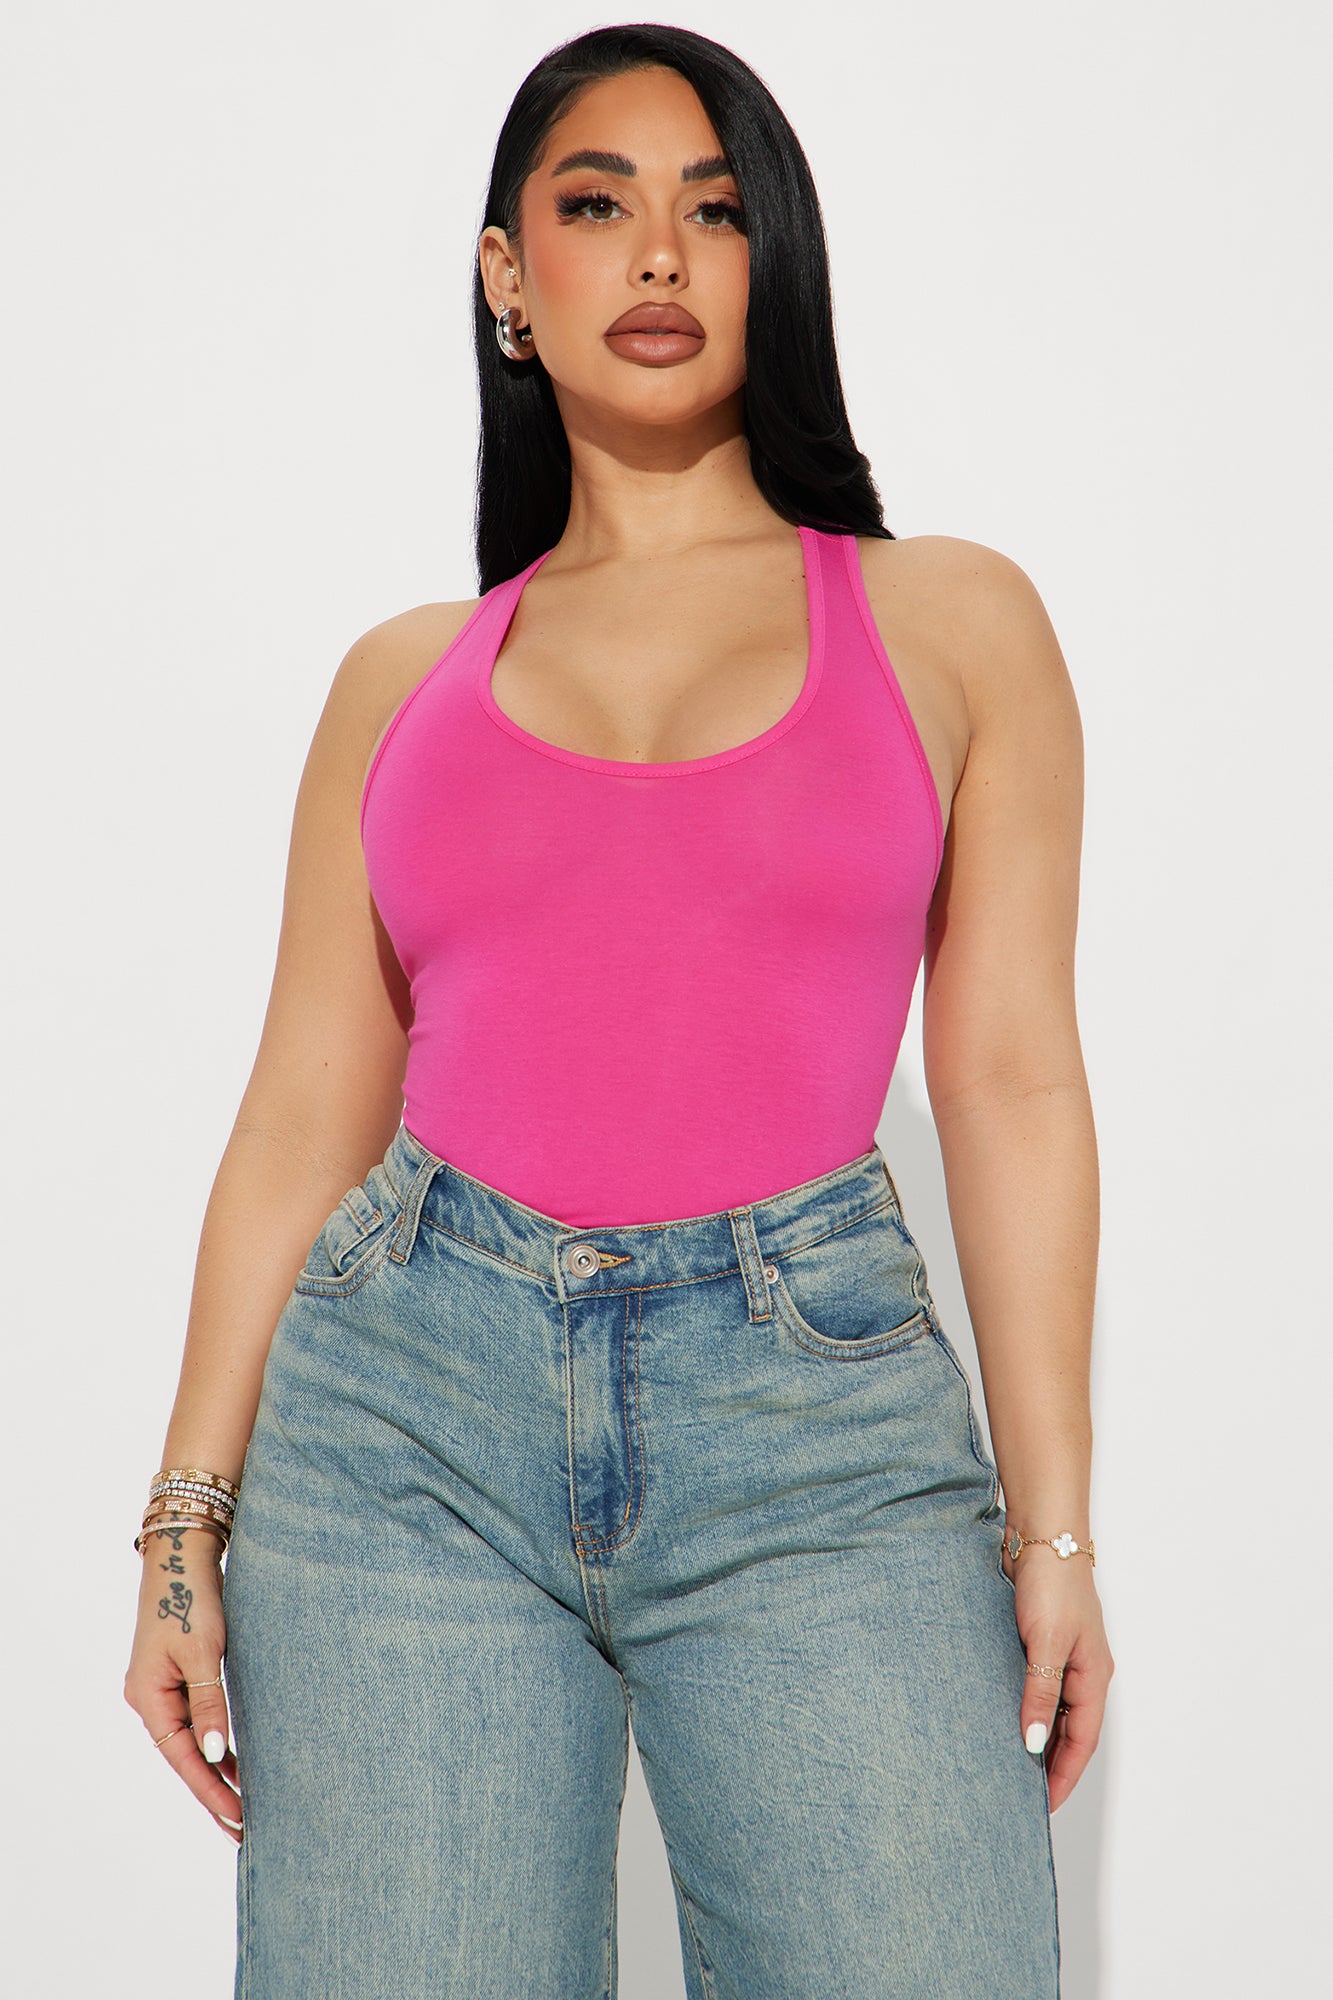 Re.Born RBWBS008_70408 Women's Solid Ribbed Basic High Neck Cotton  Racerback Bodysuit Fuchsia S at  Women's Clothing store